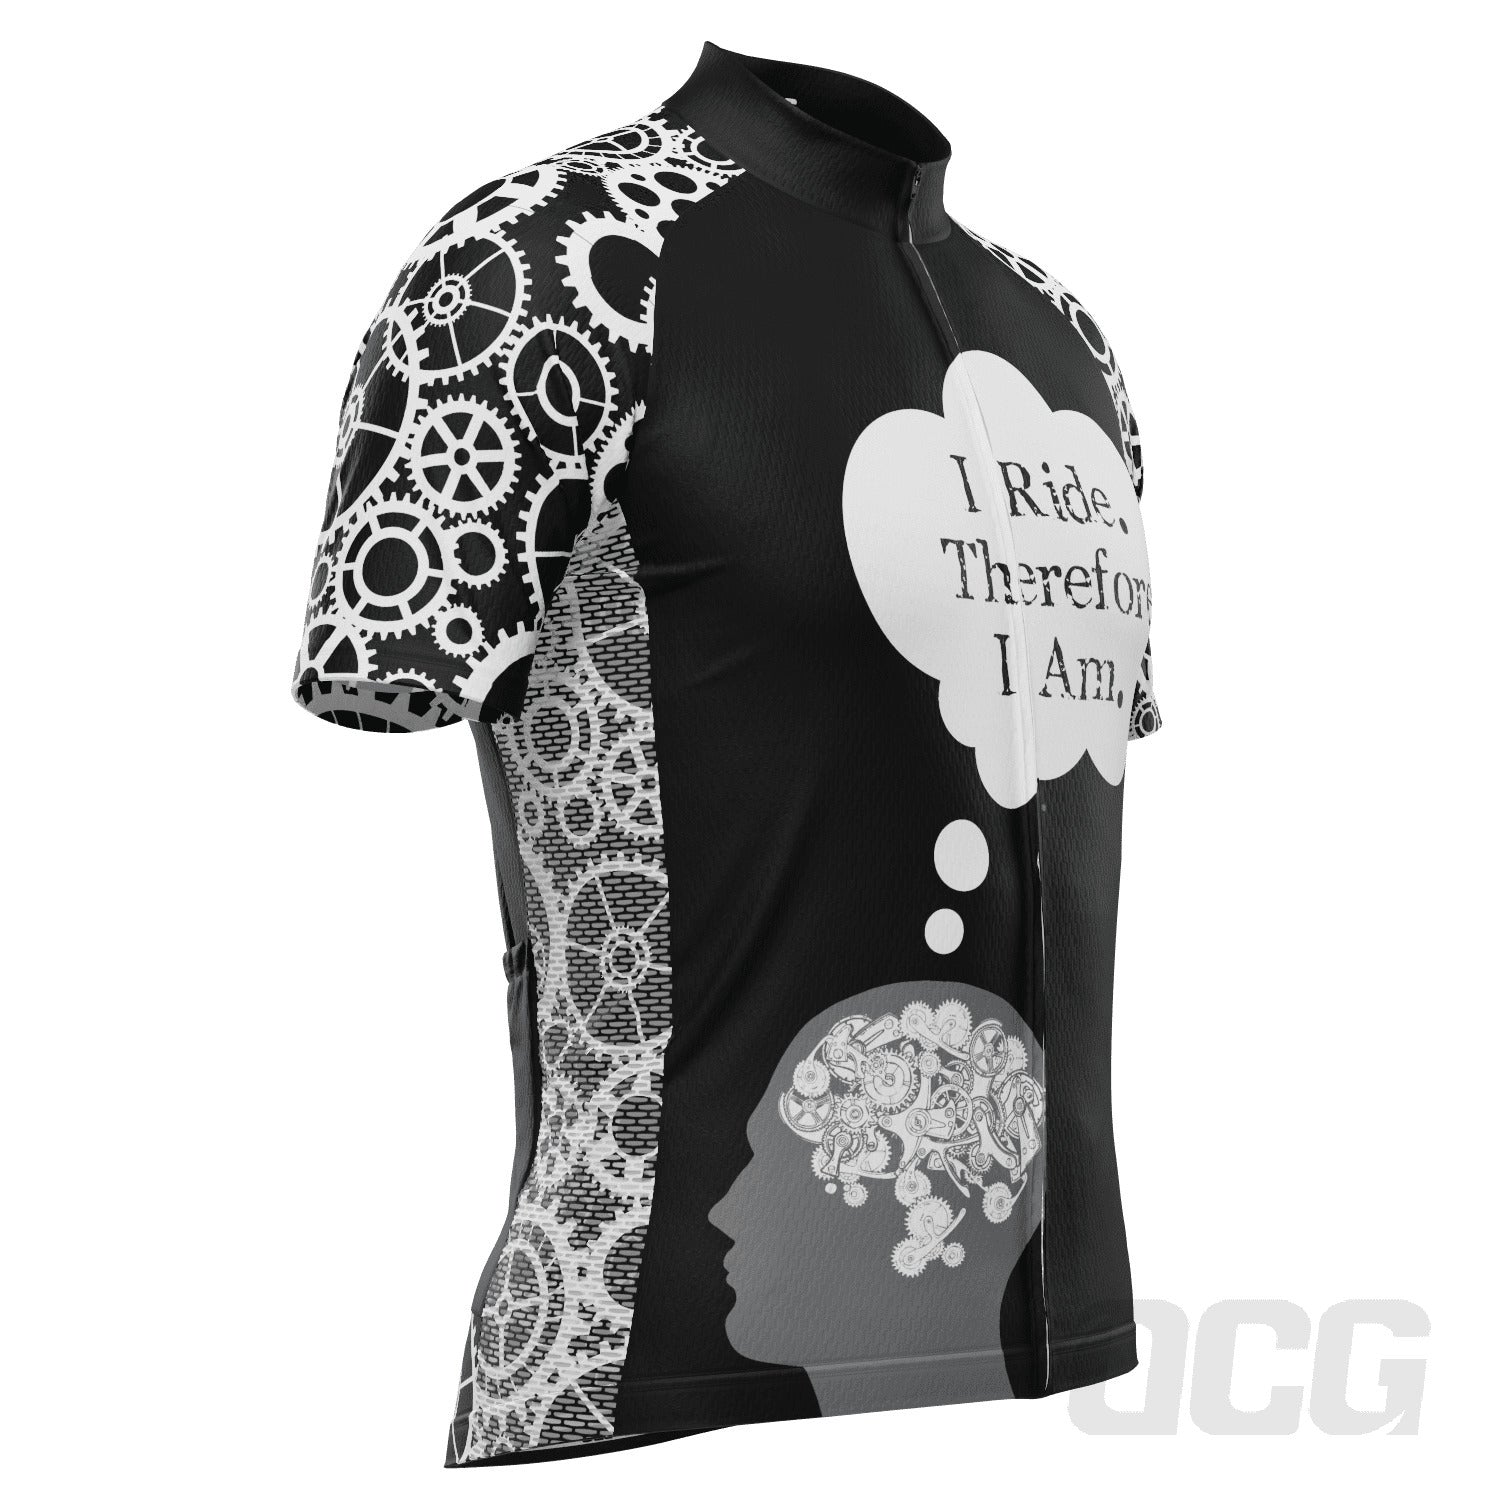 Men's I Ride Therefore I Am Short Sleeve Cycling Jersey